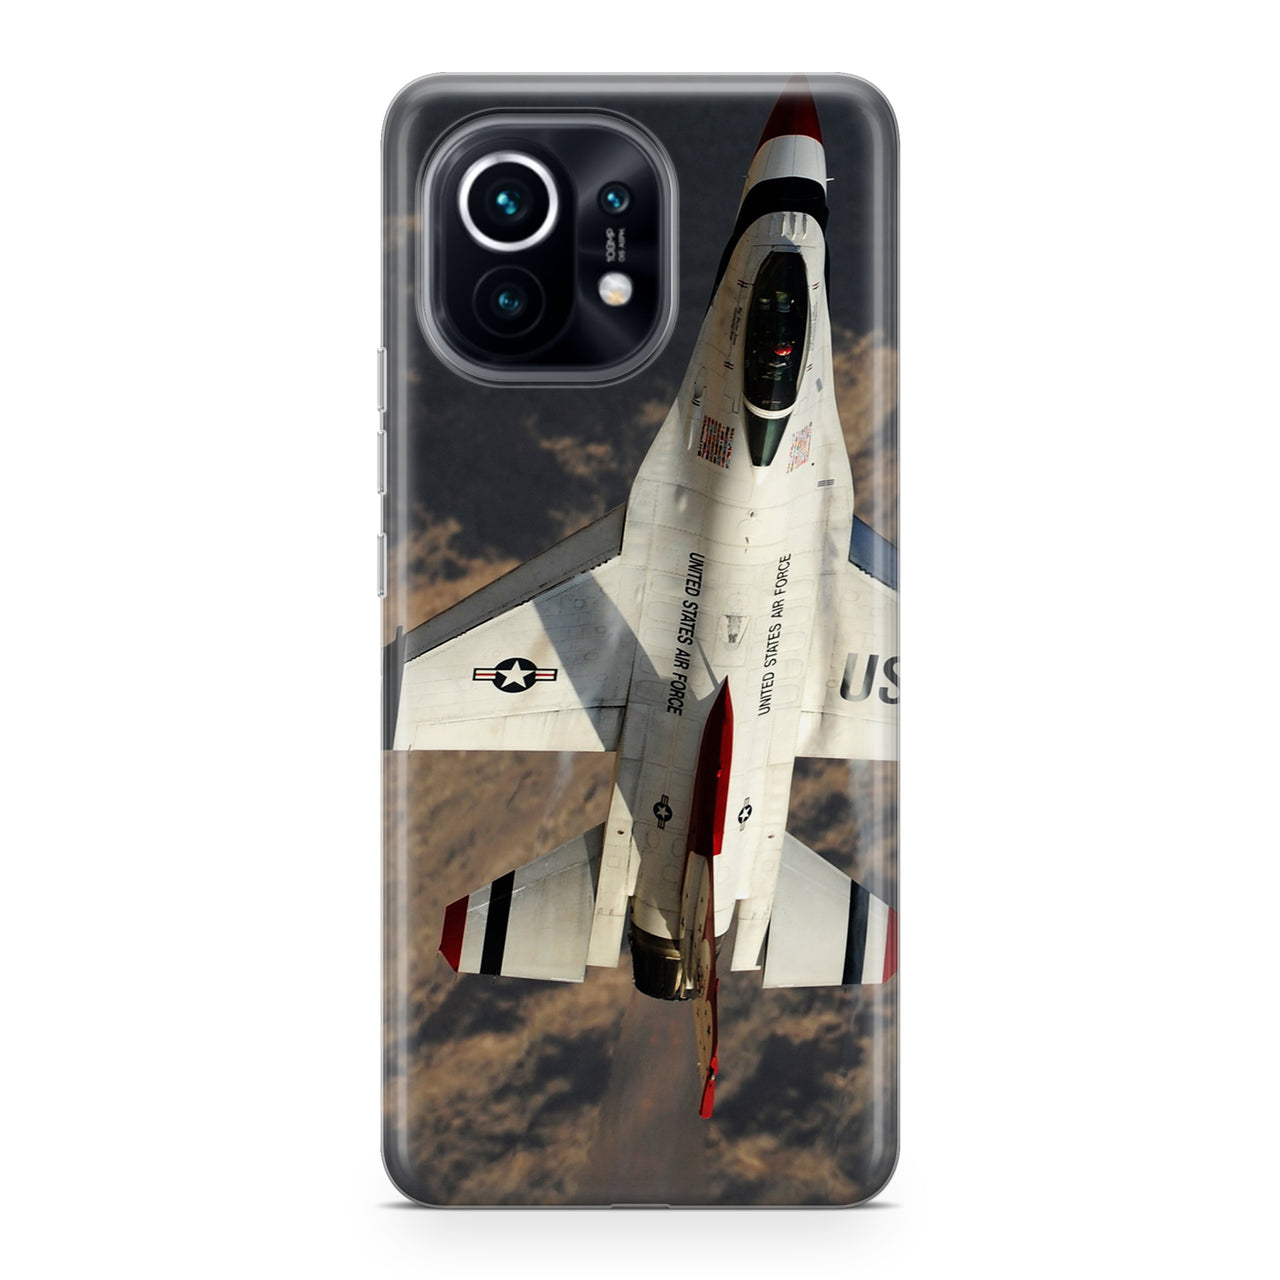 Amazing Show by Fighting Falcon F16 Designed Xiaomi Cases